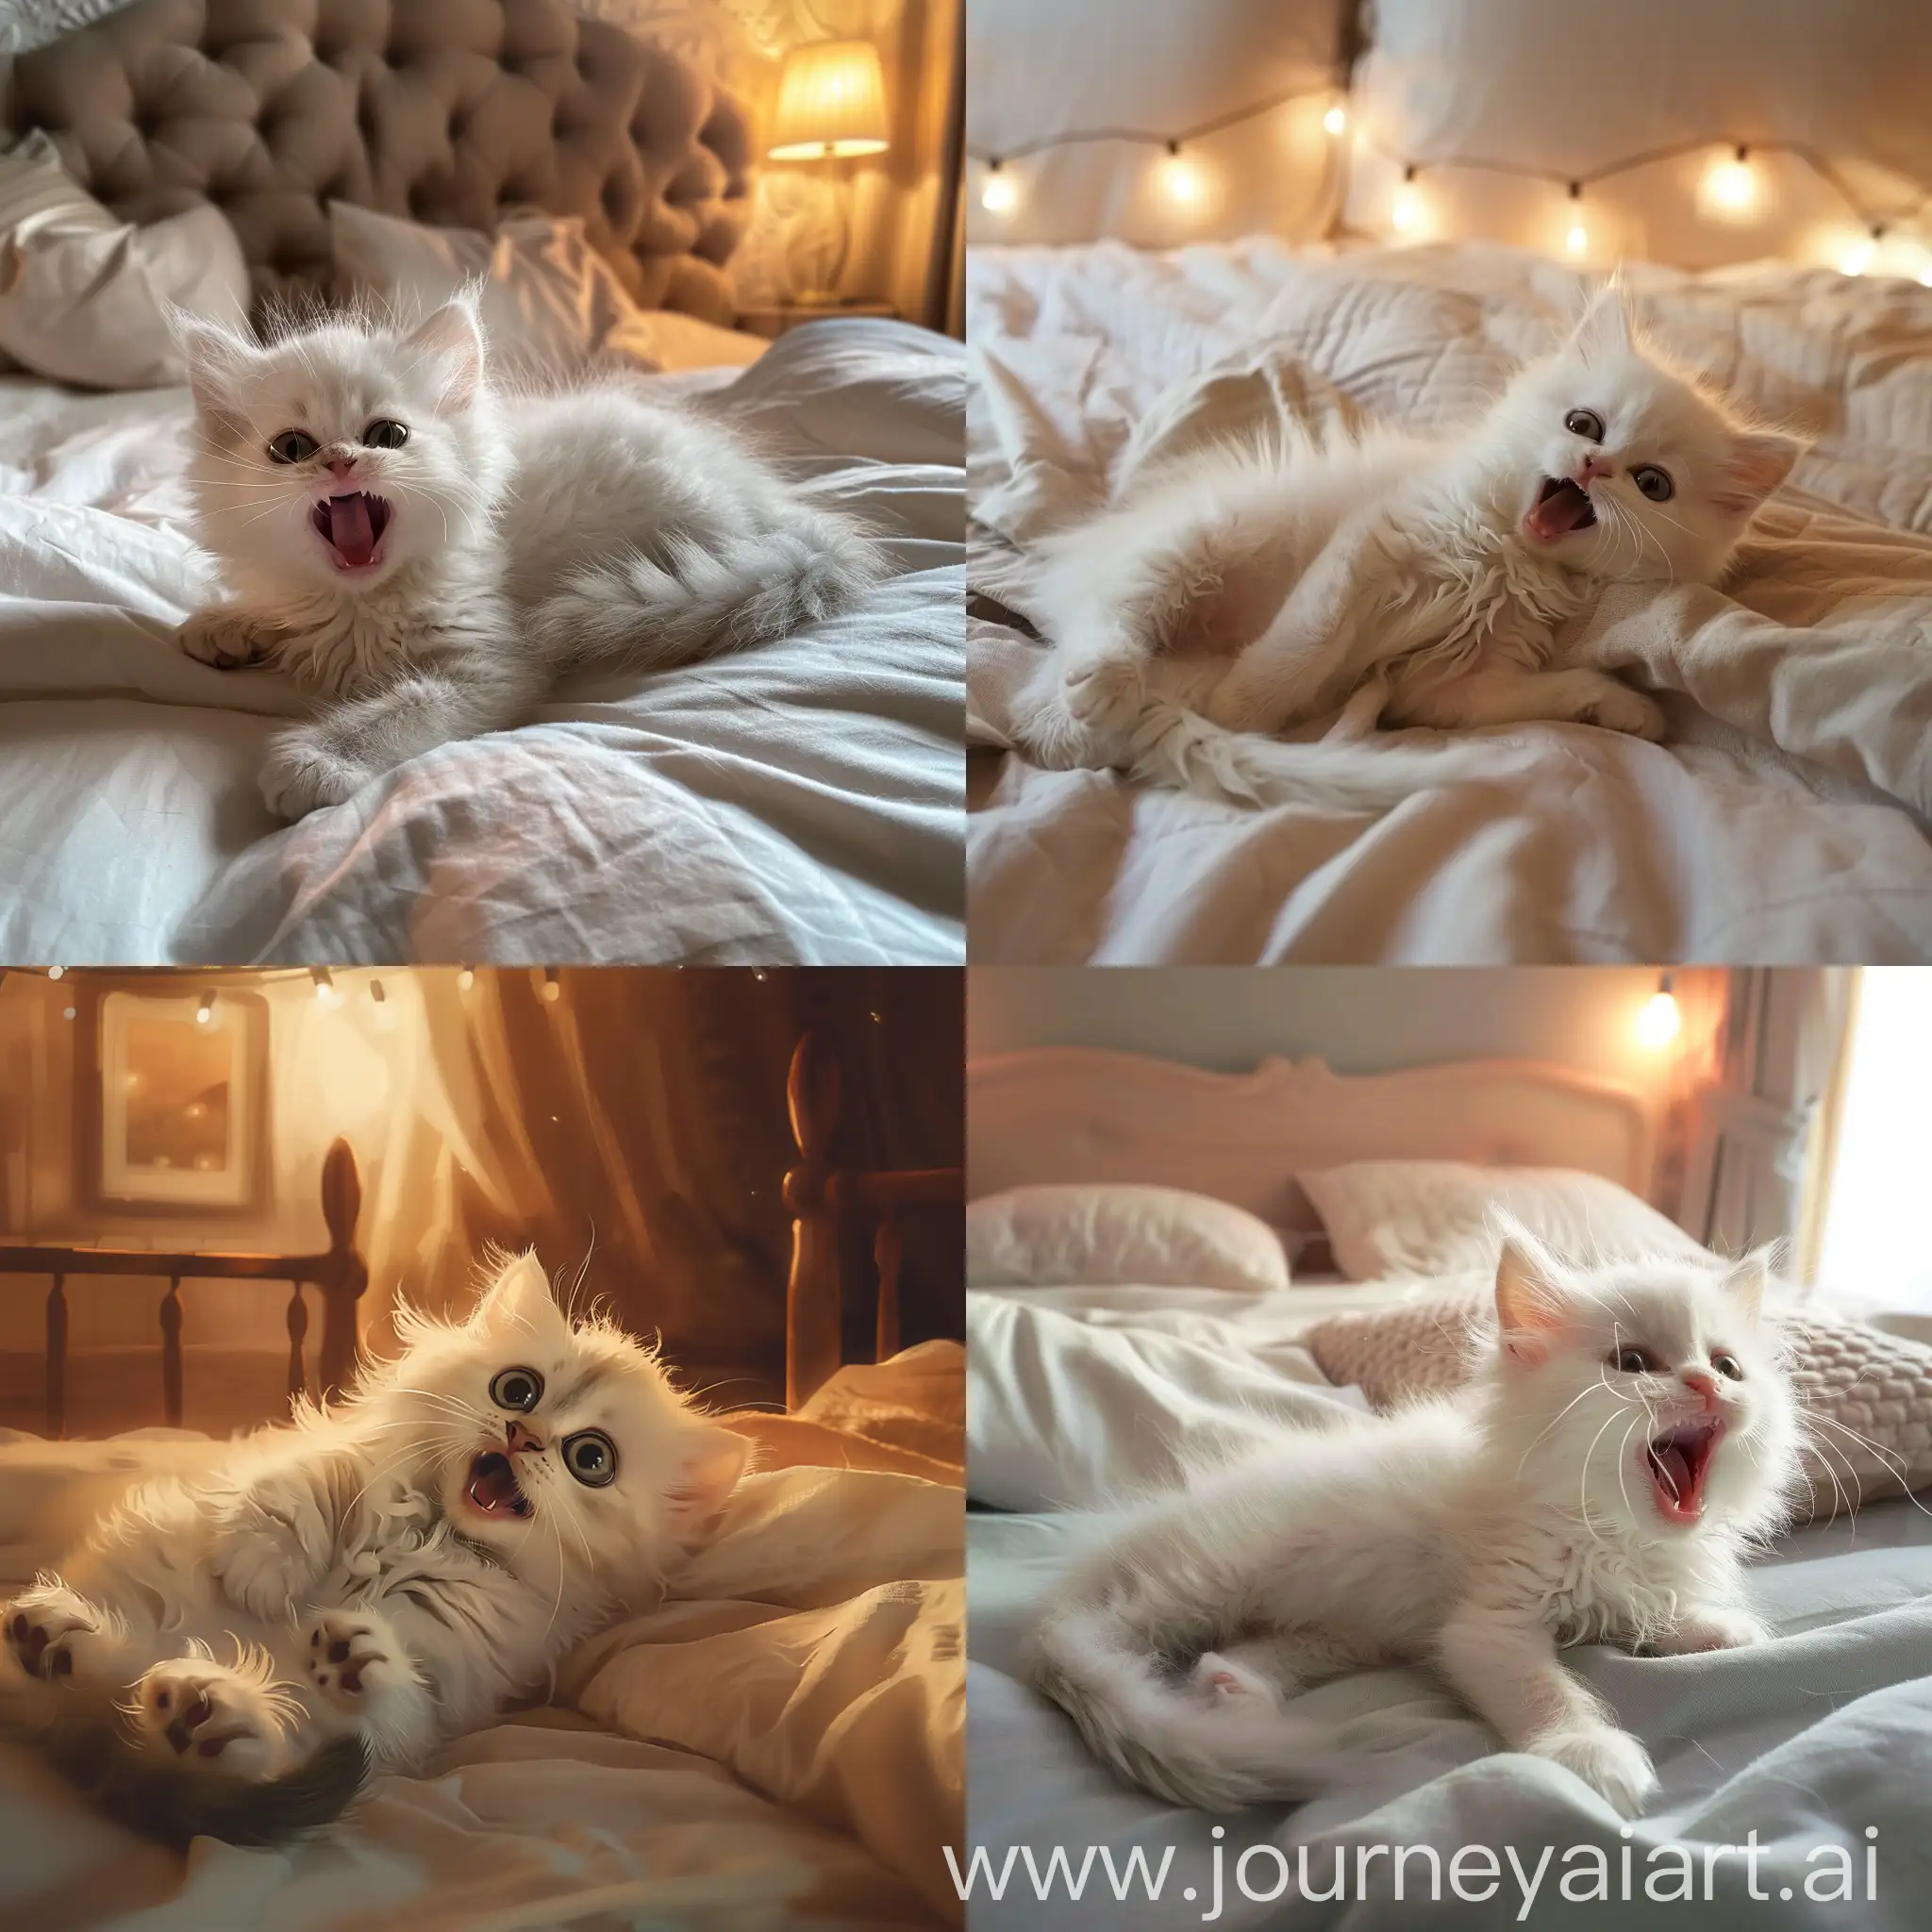 Adorable-White-Kitten-Yawning-on-Cozy-Bedroom-Bed